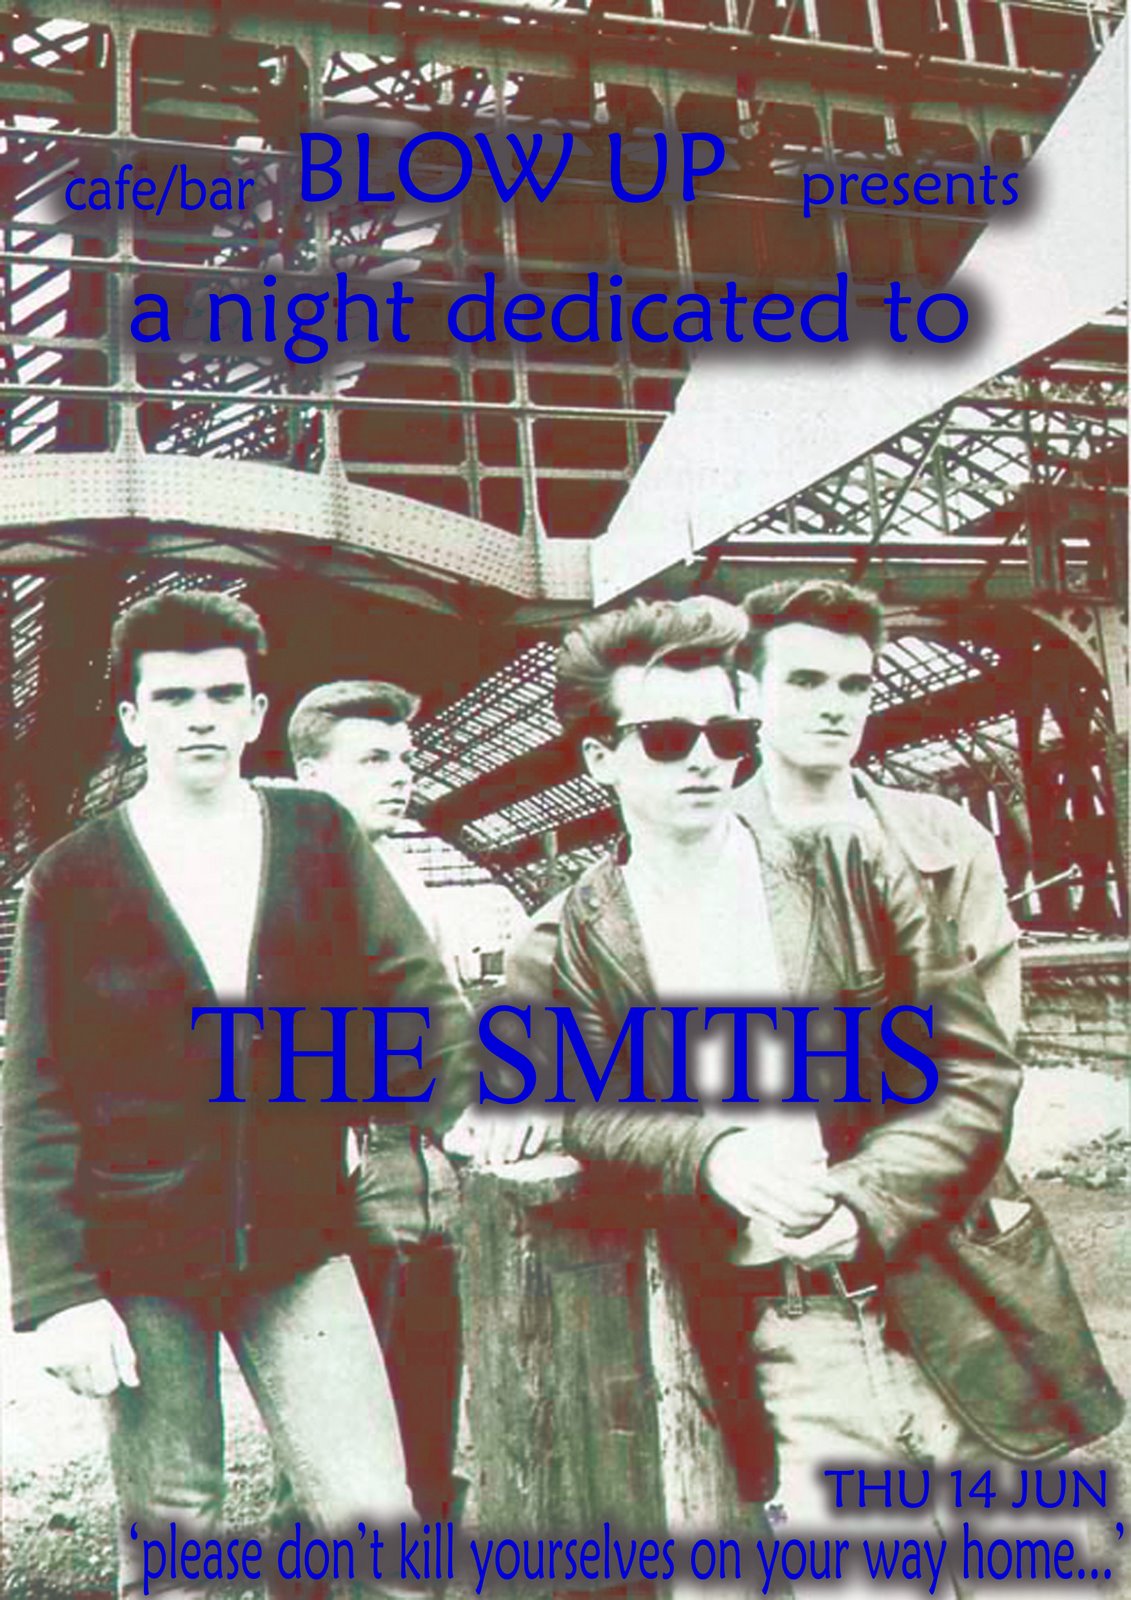 [smiths_party.jpg]